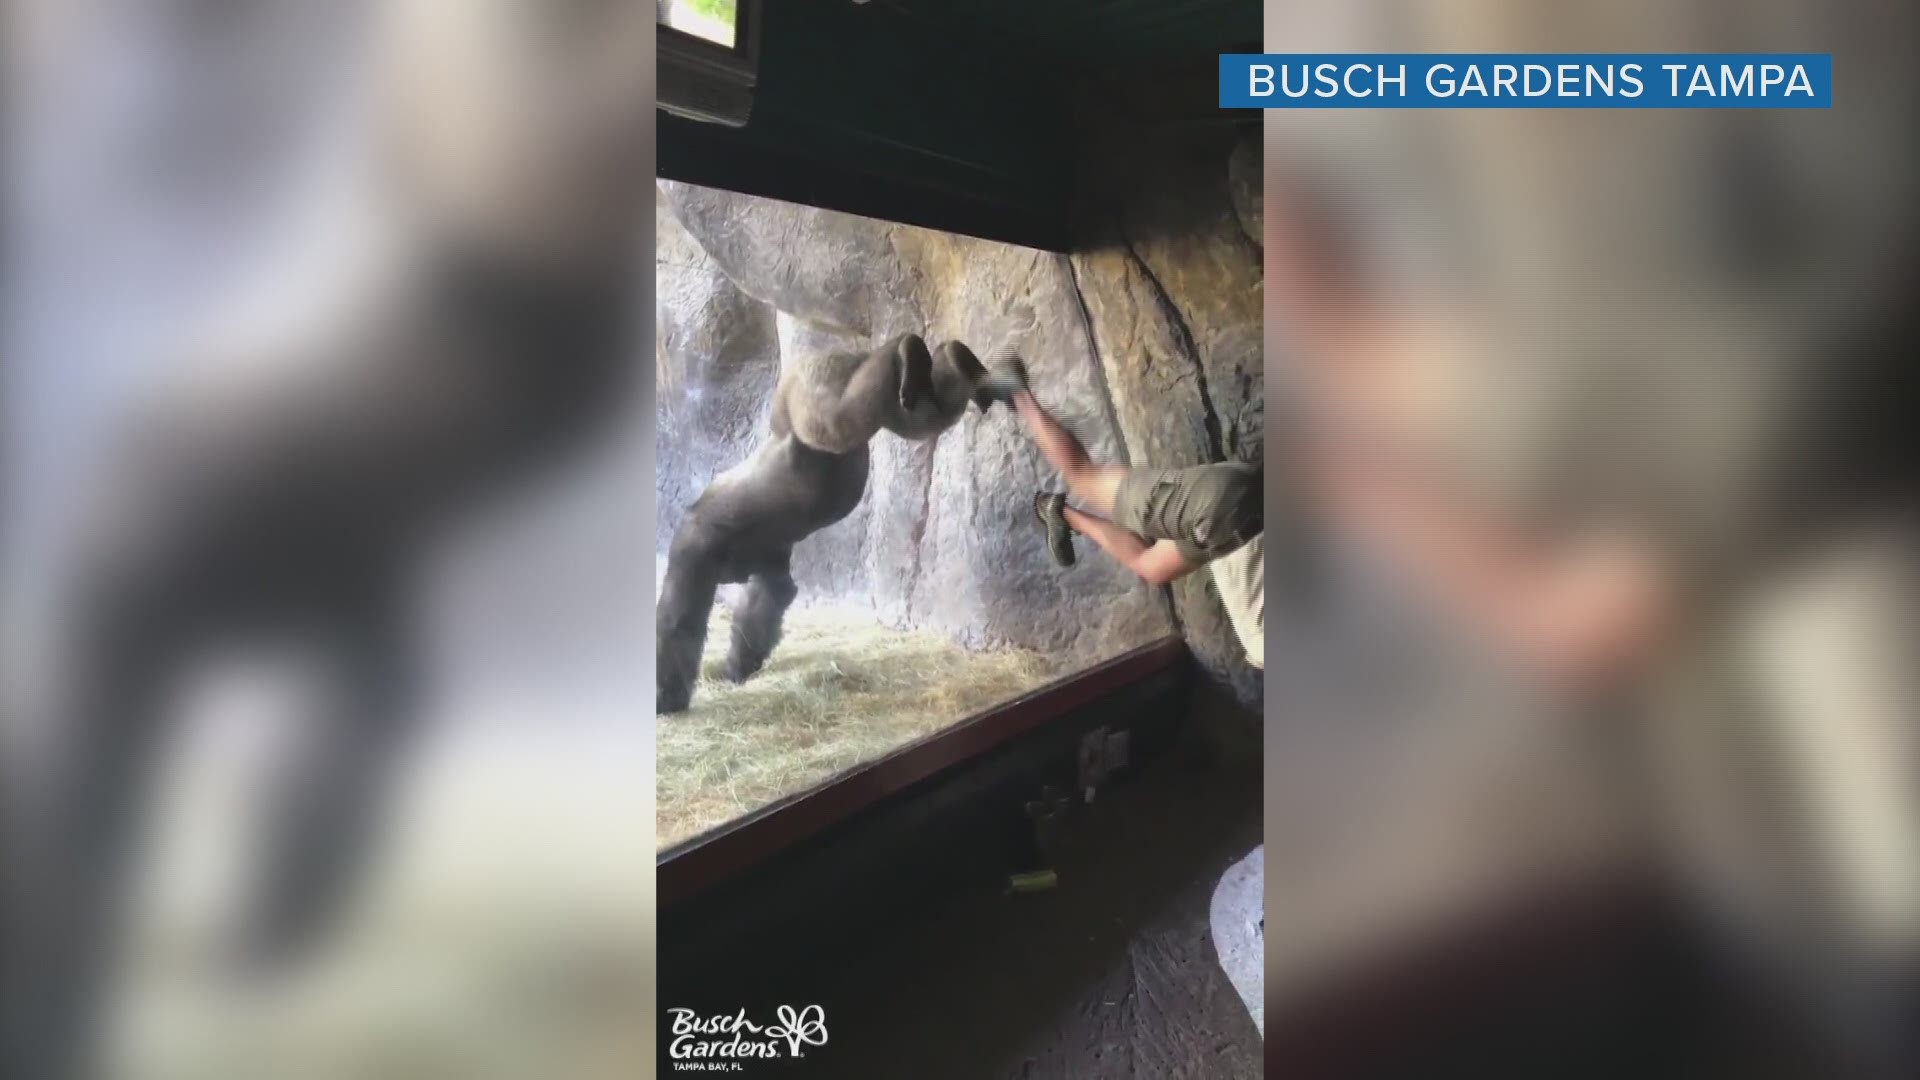 Bolingo at Busch Gardens Tampa Bay is caught on video mimicking its animal care specialist, Rachel, doing a quick handstand and "hugging" the glass.